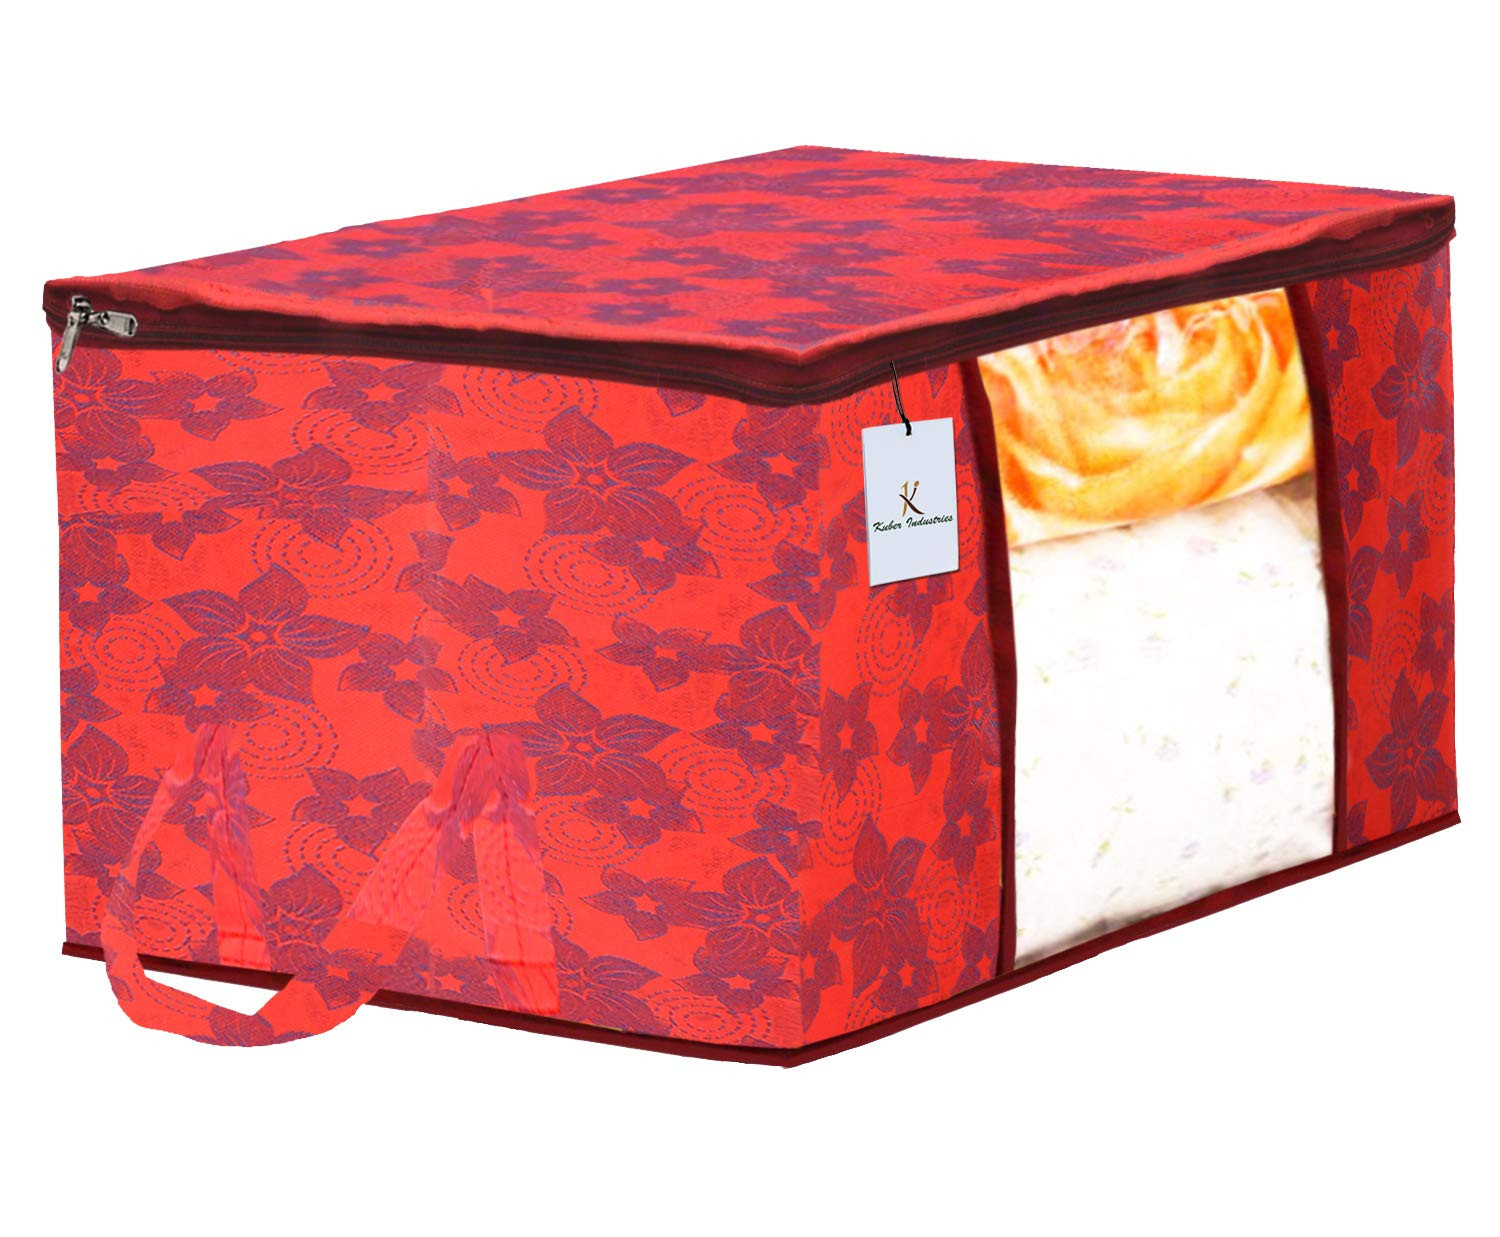 Kuber Industries Metallic Printed Non Woven Saree Cover And Underbed Storage Bag, Cloth Organizer For Storage, Blanket Cover Combo Set (Red) -CTKTC38547